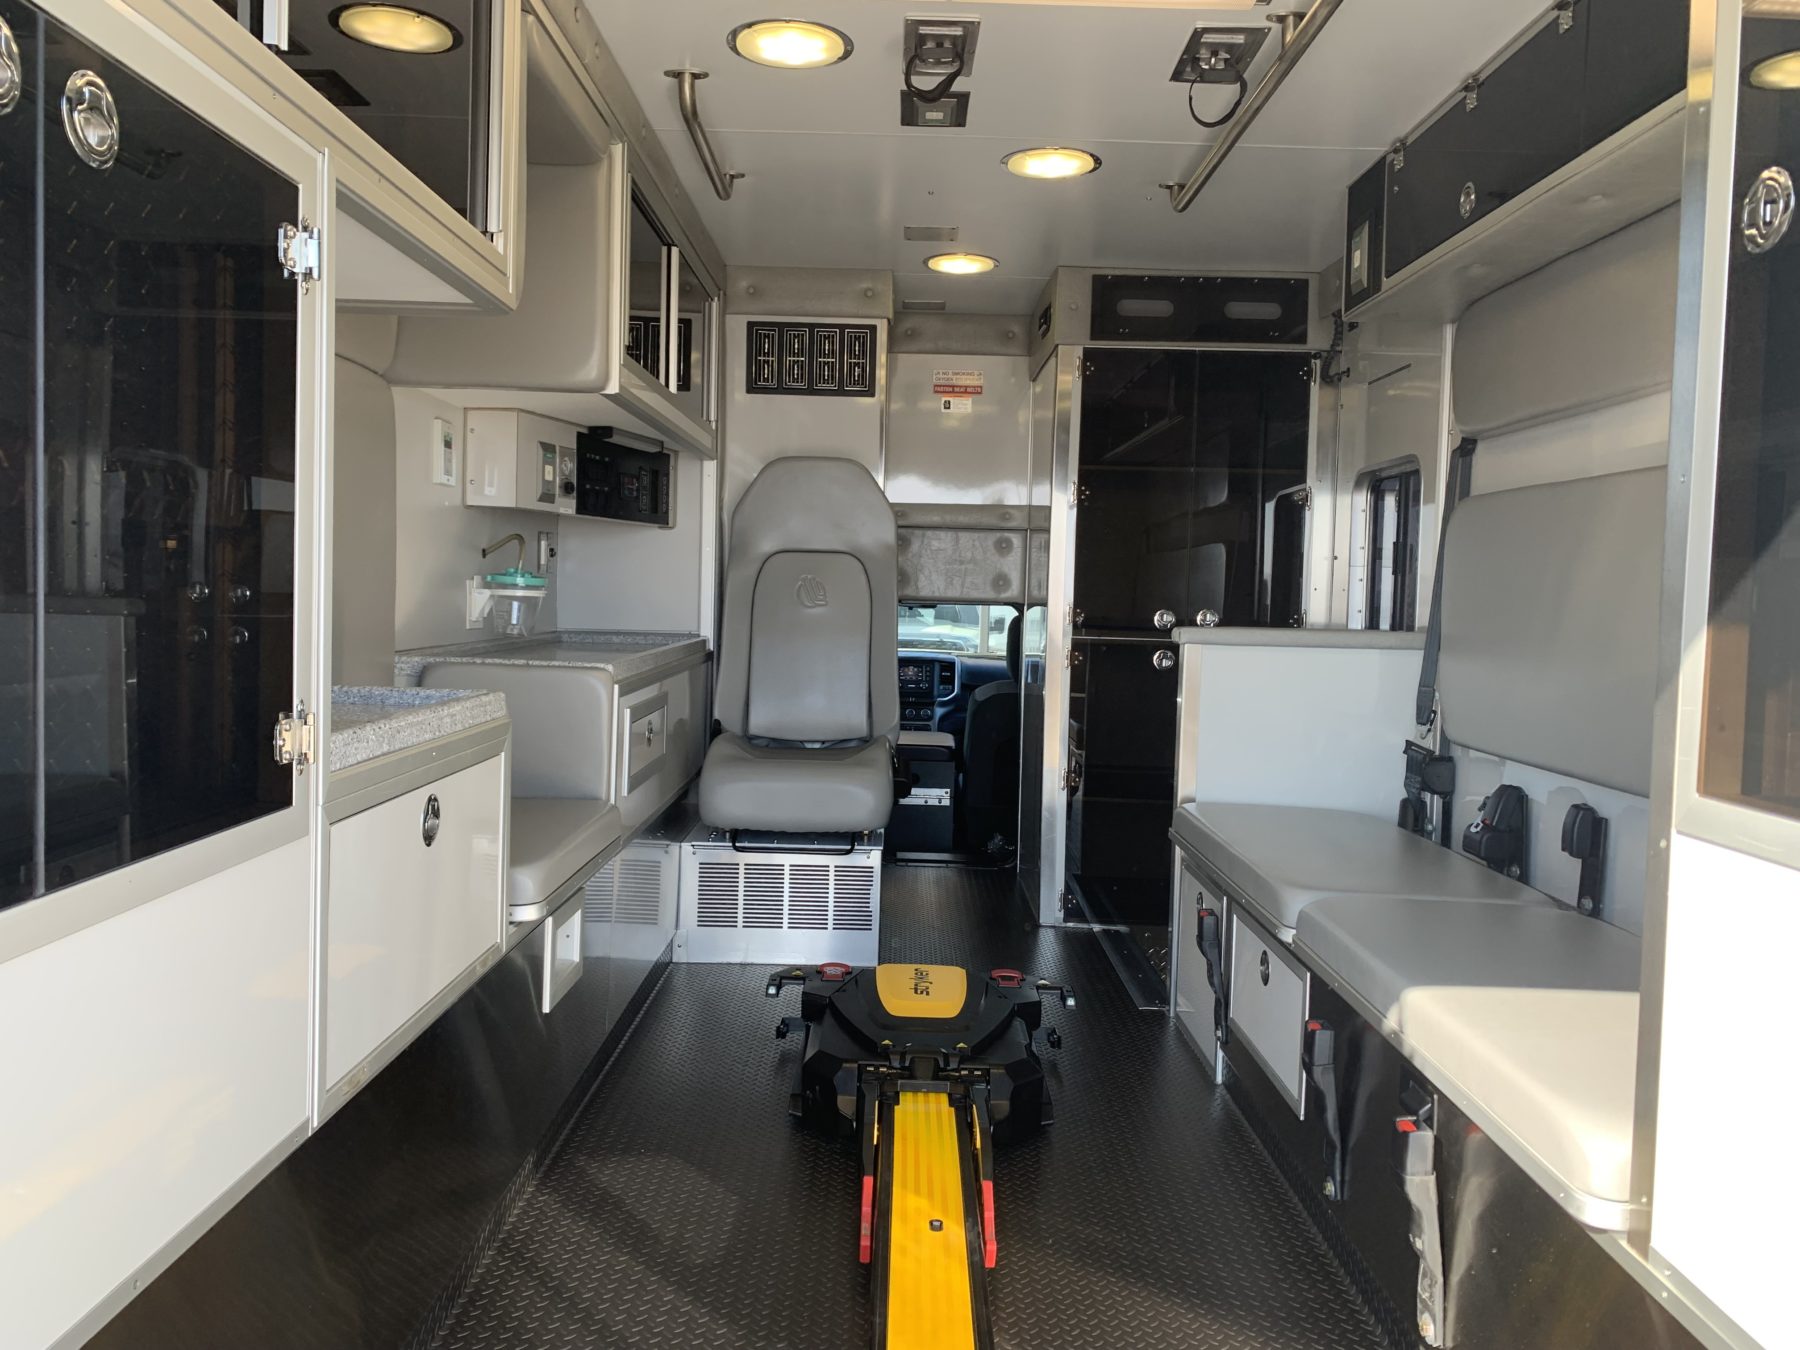 2022 Ram 5500 4x4 Heavy Duty Ambulance For Sale – Picture 2